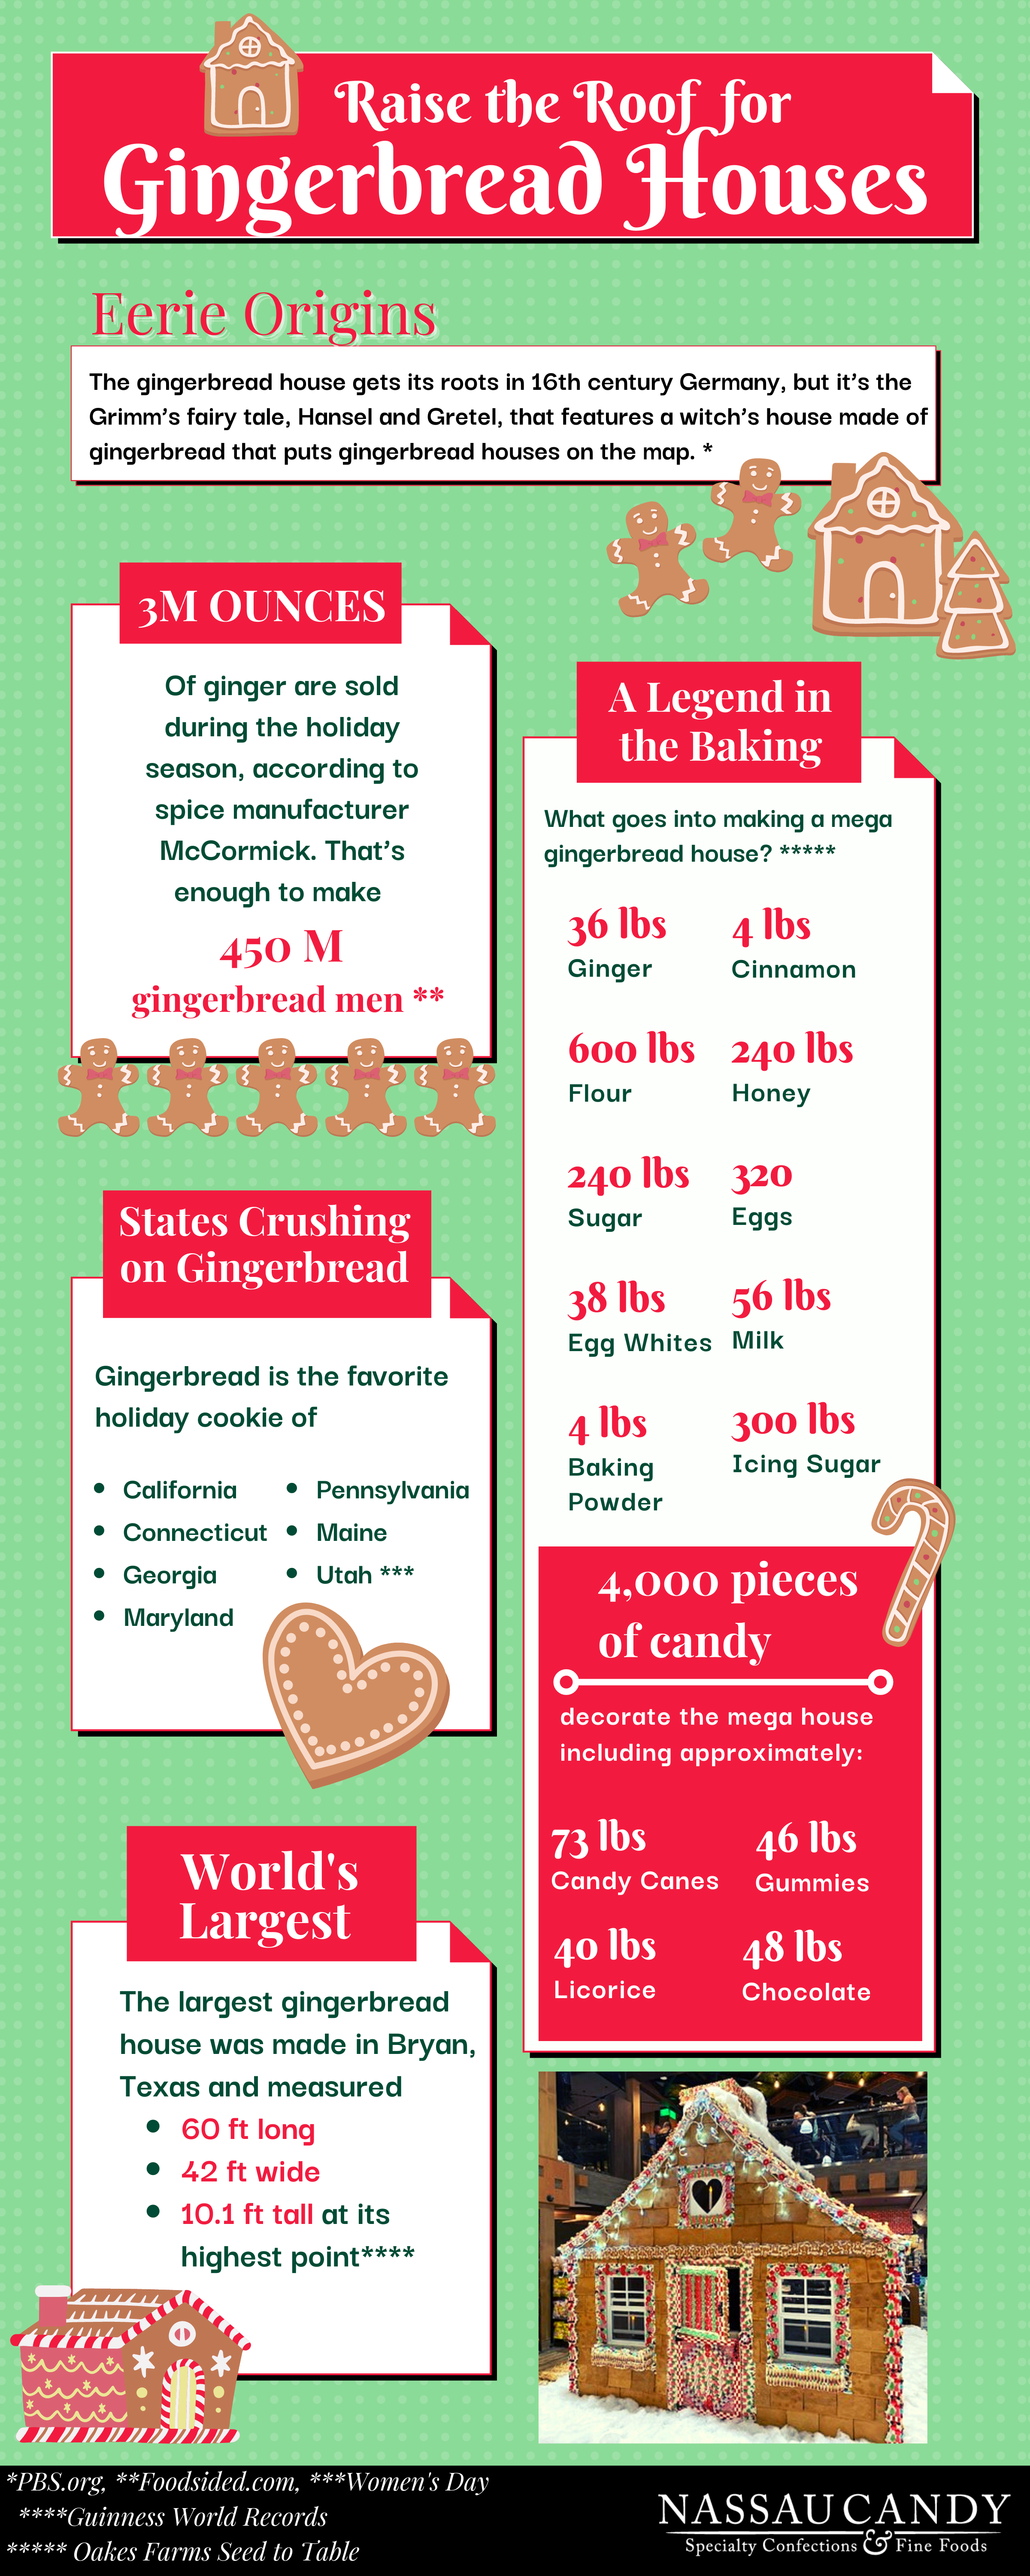 gingerbread facts, gingerbread house facts, gingerbread house Infographic, infographic, gingerbread house history, food history, Christmas infographic, holiday infographic